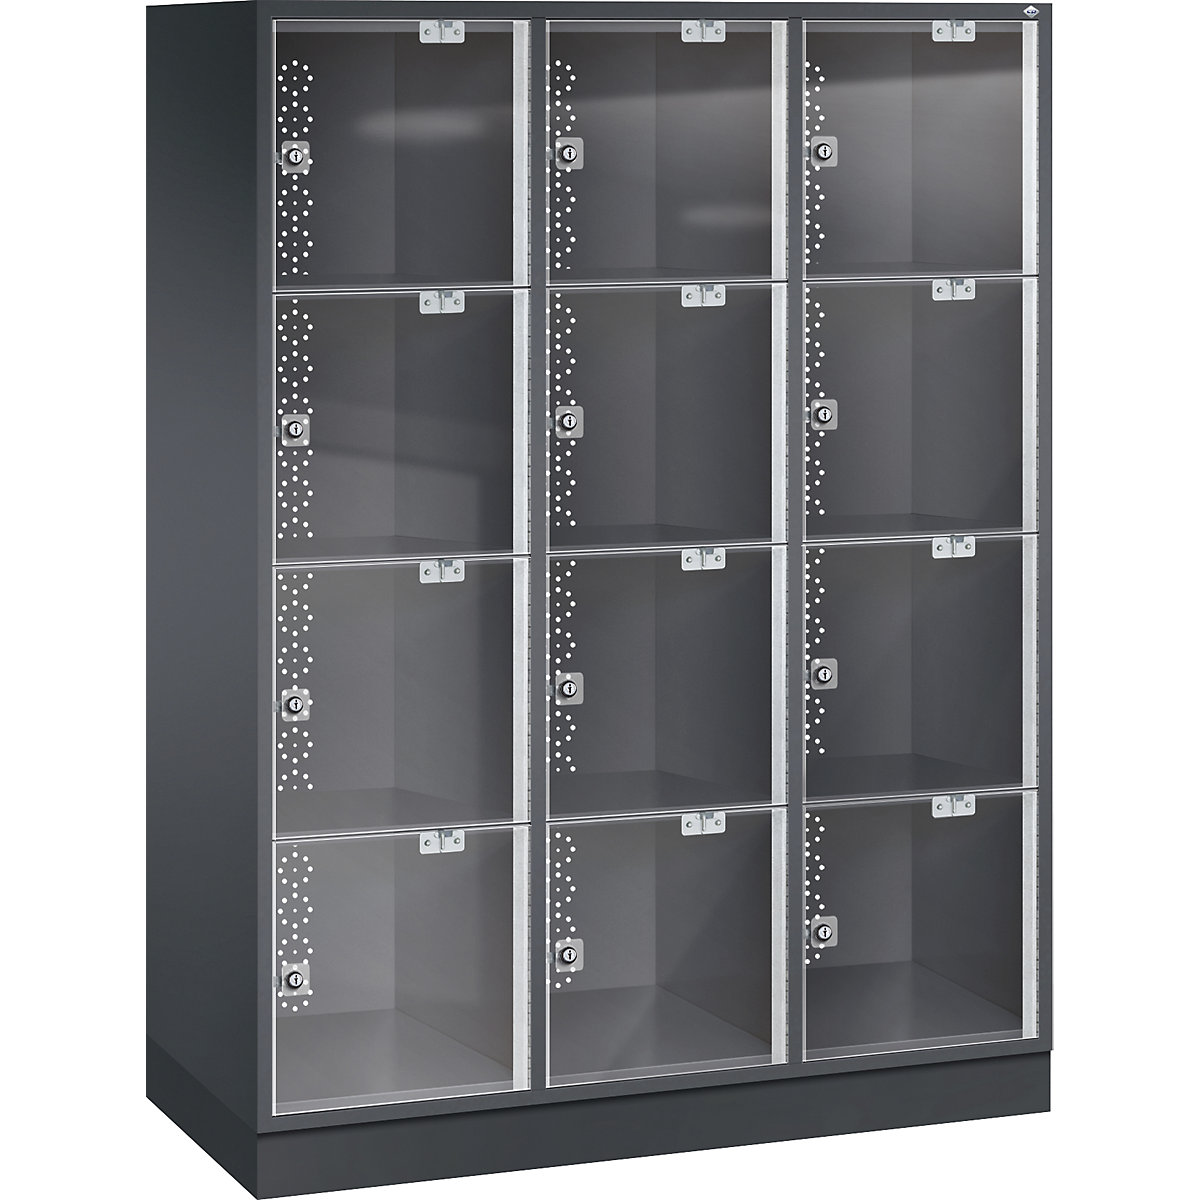 INTRO steel compartment locker with acrylic glass door – C+P, HxWxD 1750 x 1220 x 500 mm, compartment height 380 mm, 12 compartments, black grey body